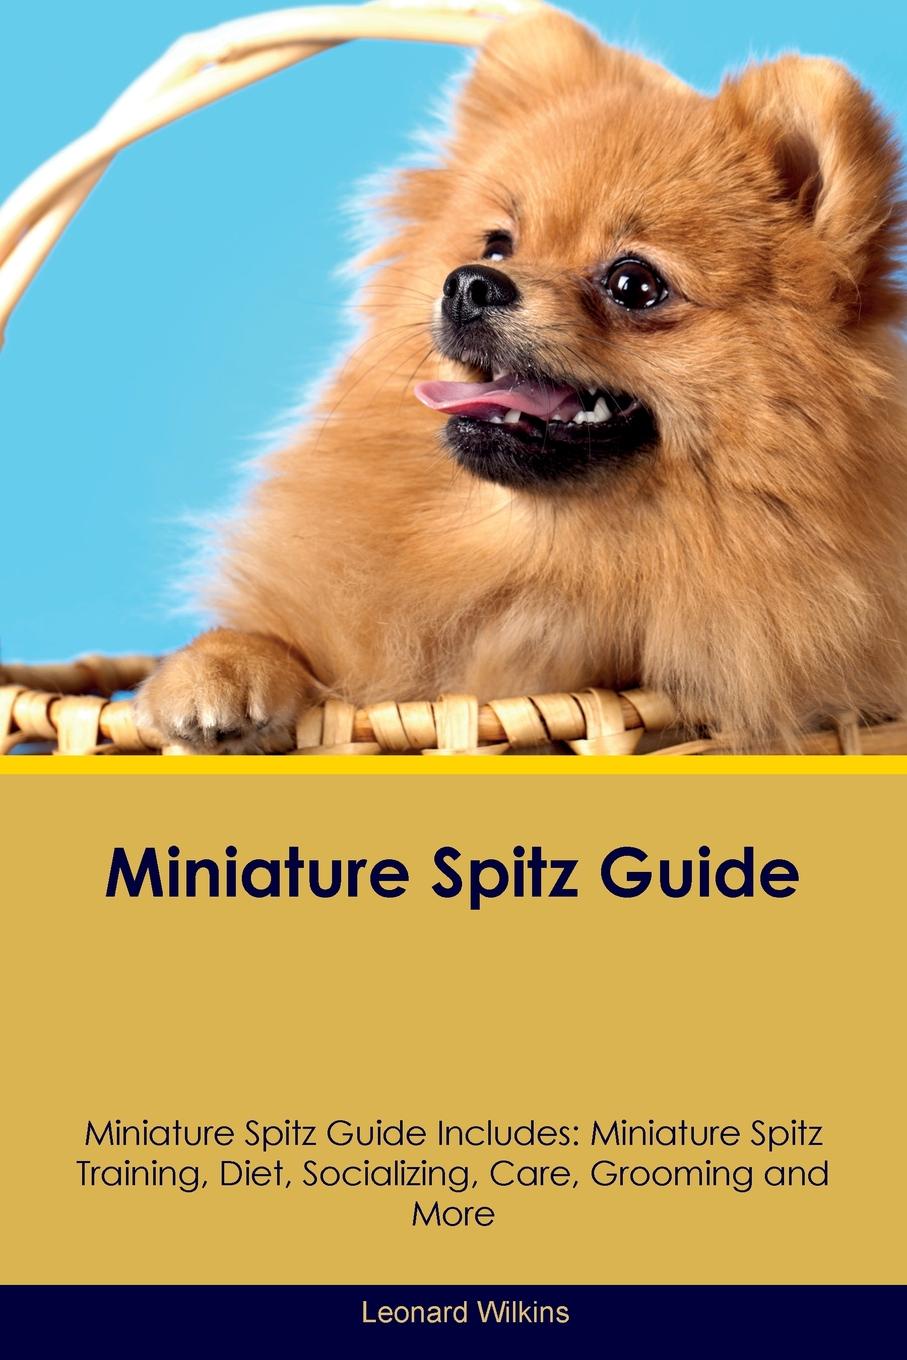 Miniature Spitz Guide Miniature Spitz Guide Includes. Miniature Spitz Training, Diet, Socializing, Care, Grooming, Breeding and More